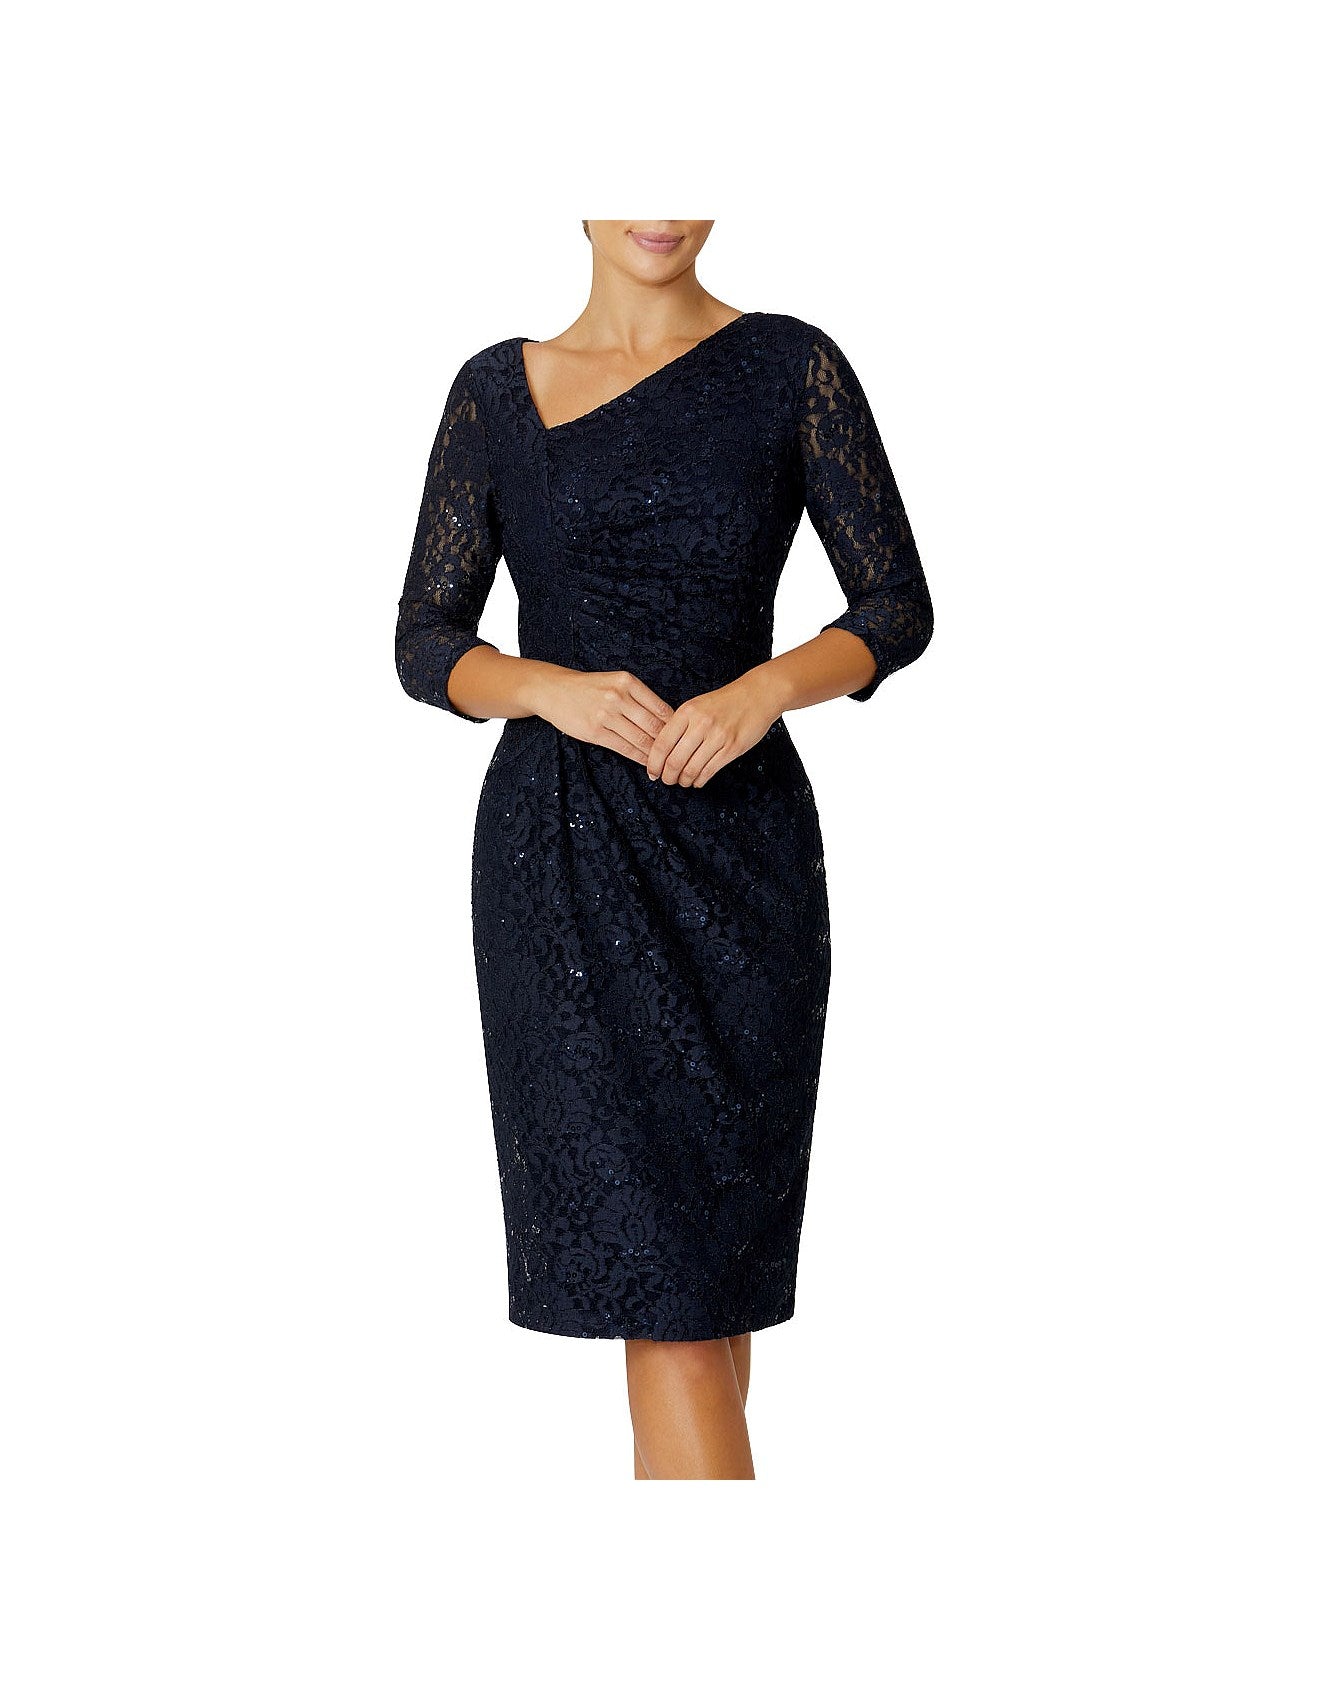 Navy Stretch Lace & Sequin Dress